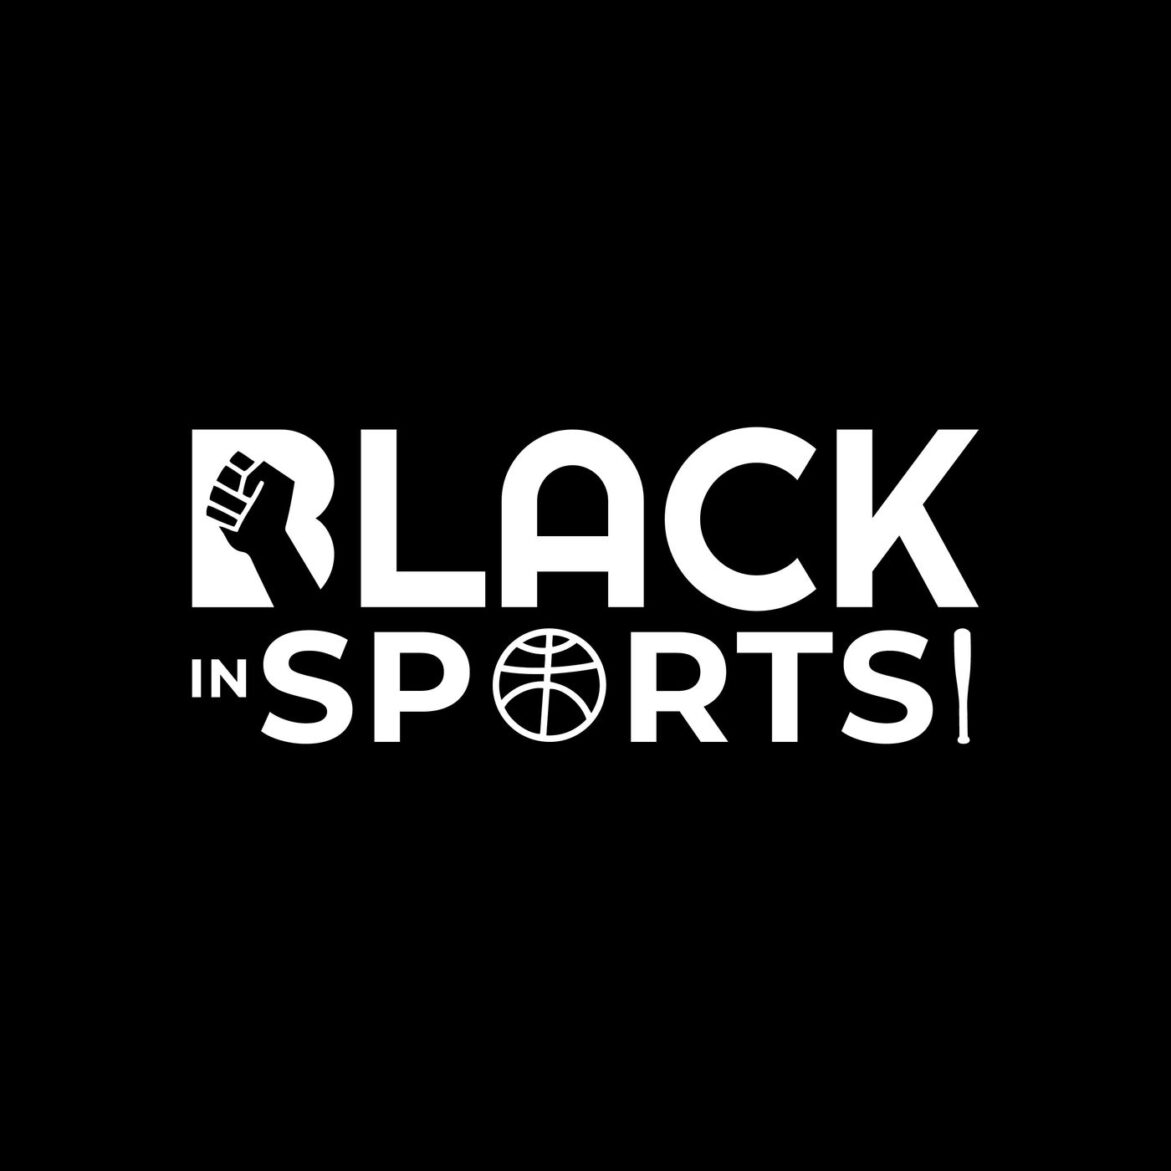 Black Podcasting - The Locker Room - S3 Ep 9 | WNBA Aces Game  "Gucci Row Like UNLV"